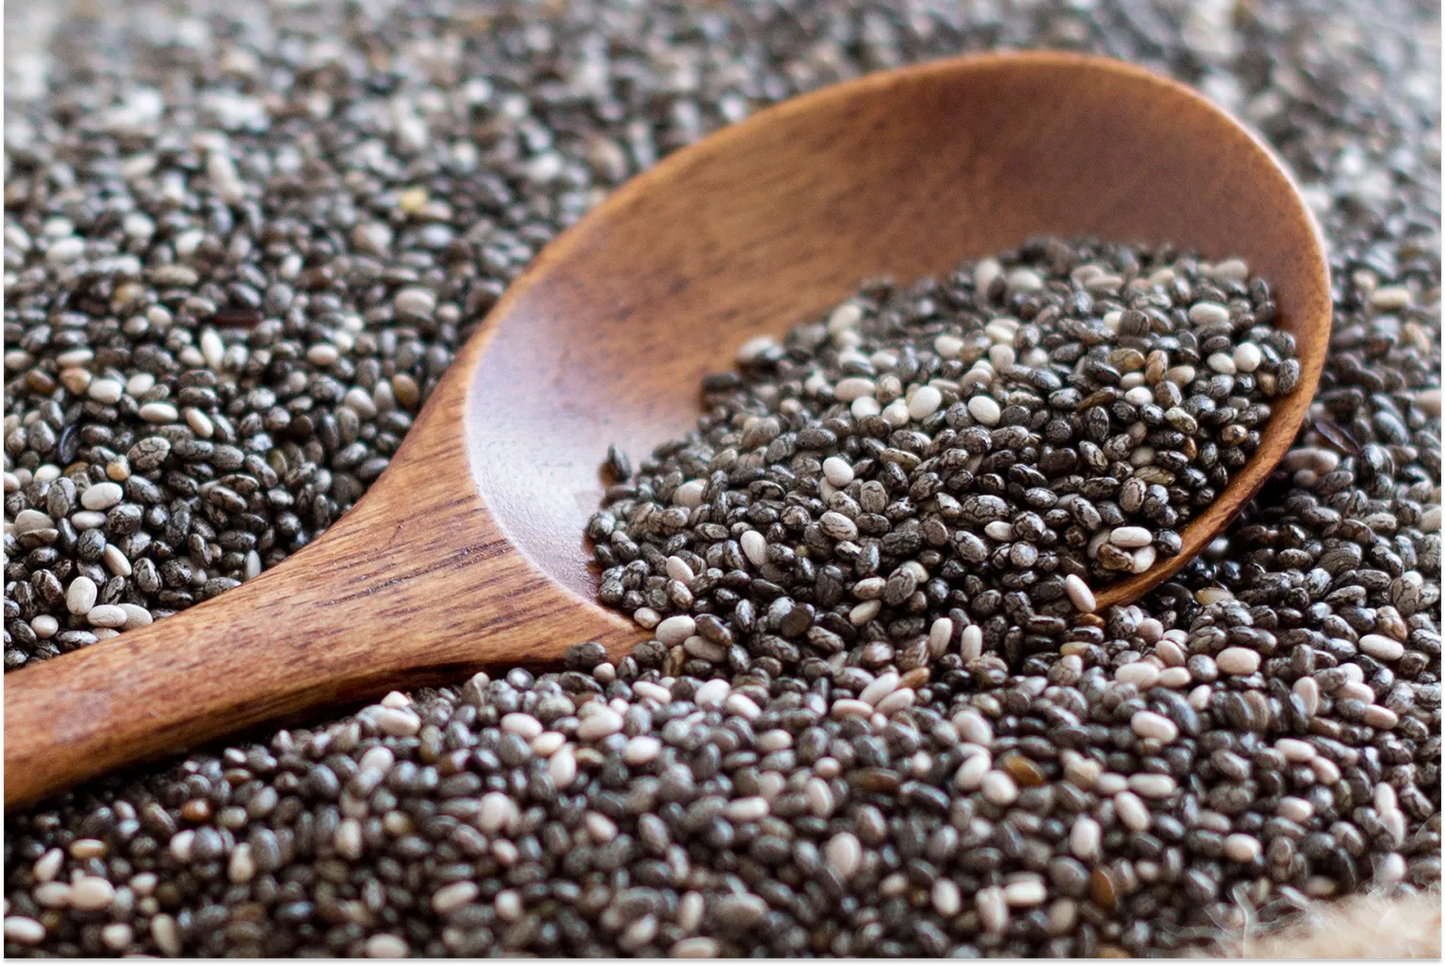 How To Eat Chia Seeds and How Many To Have Per Day